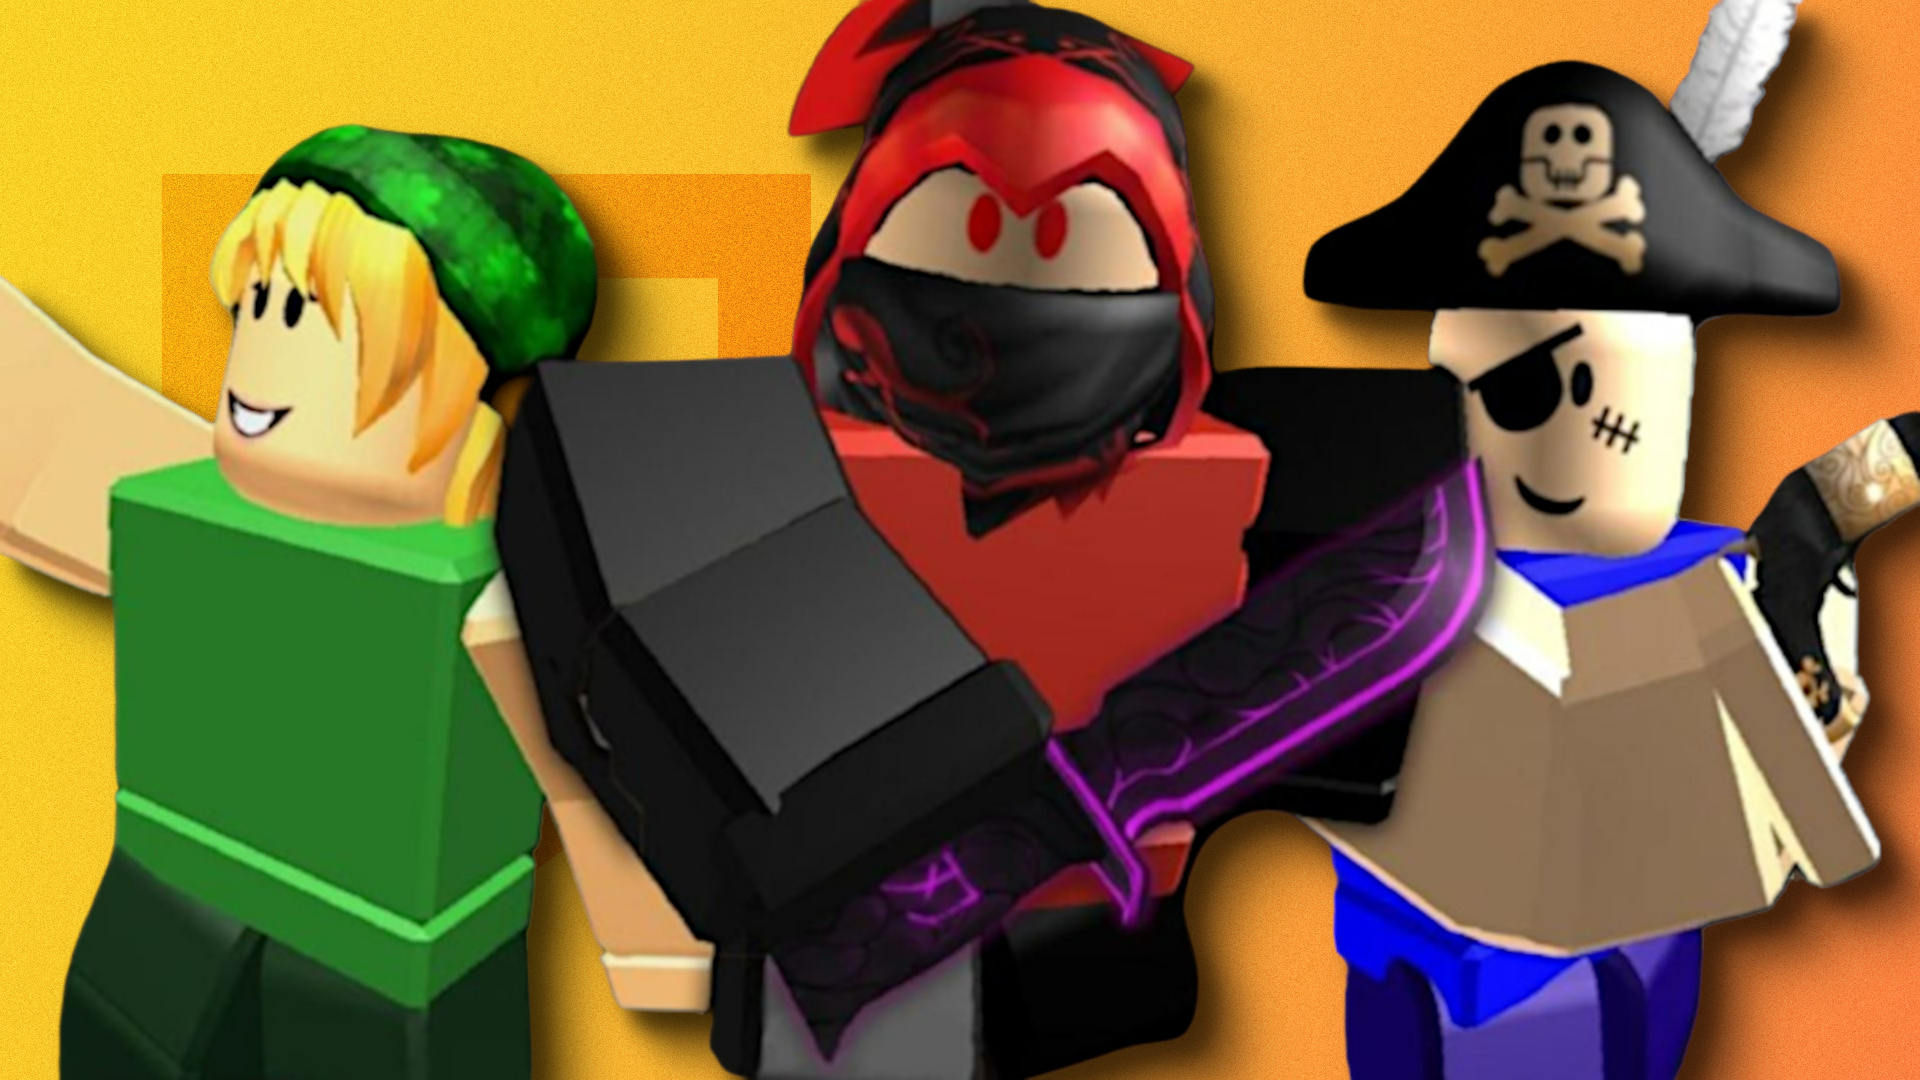 How To REDEEM Codes in Murder Mystery 2! (Roblox MM2 Codes) 